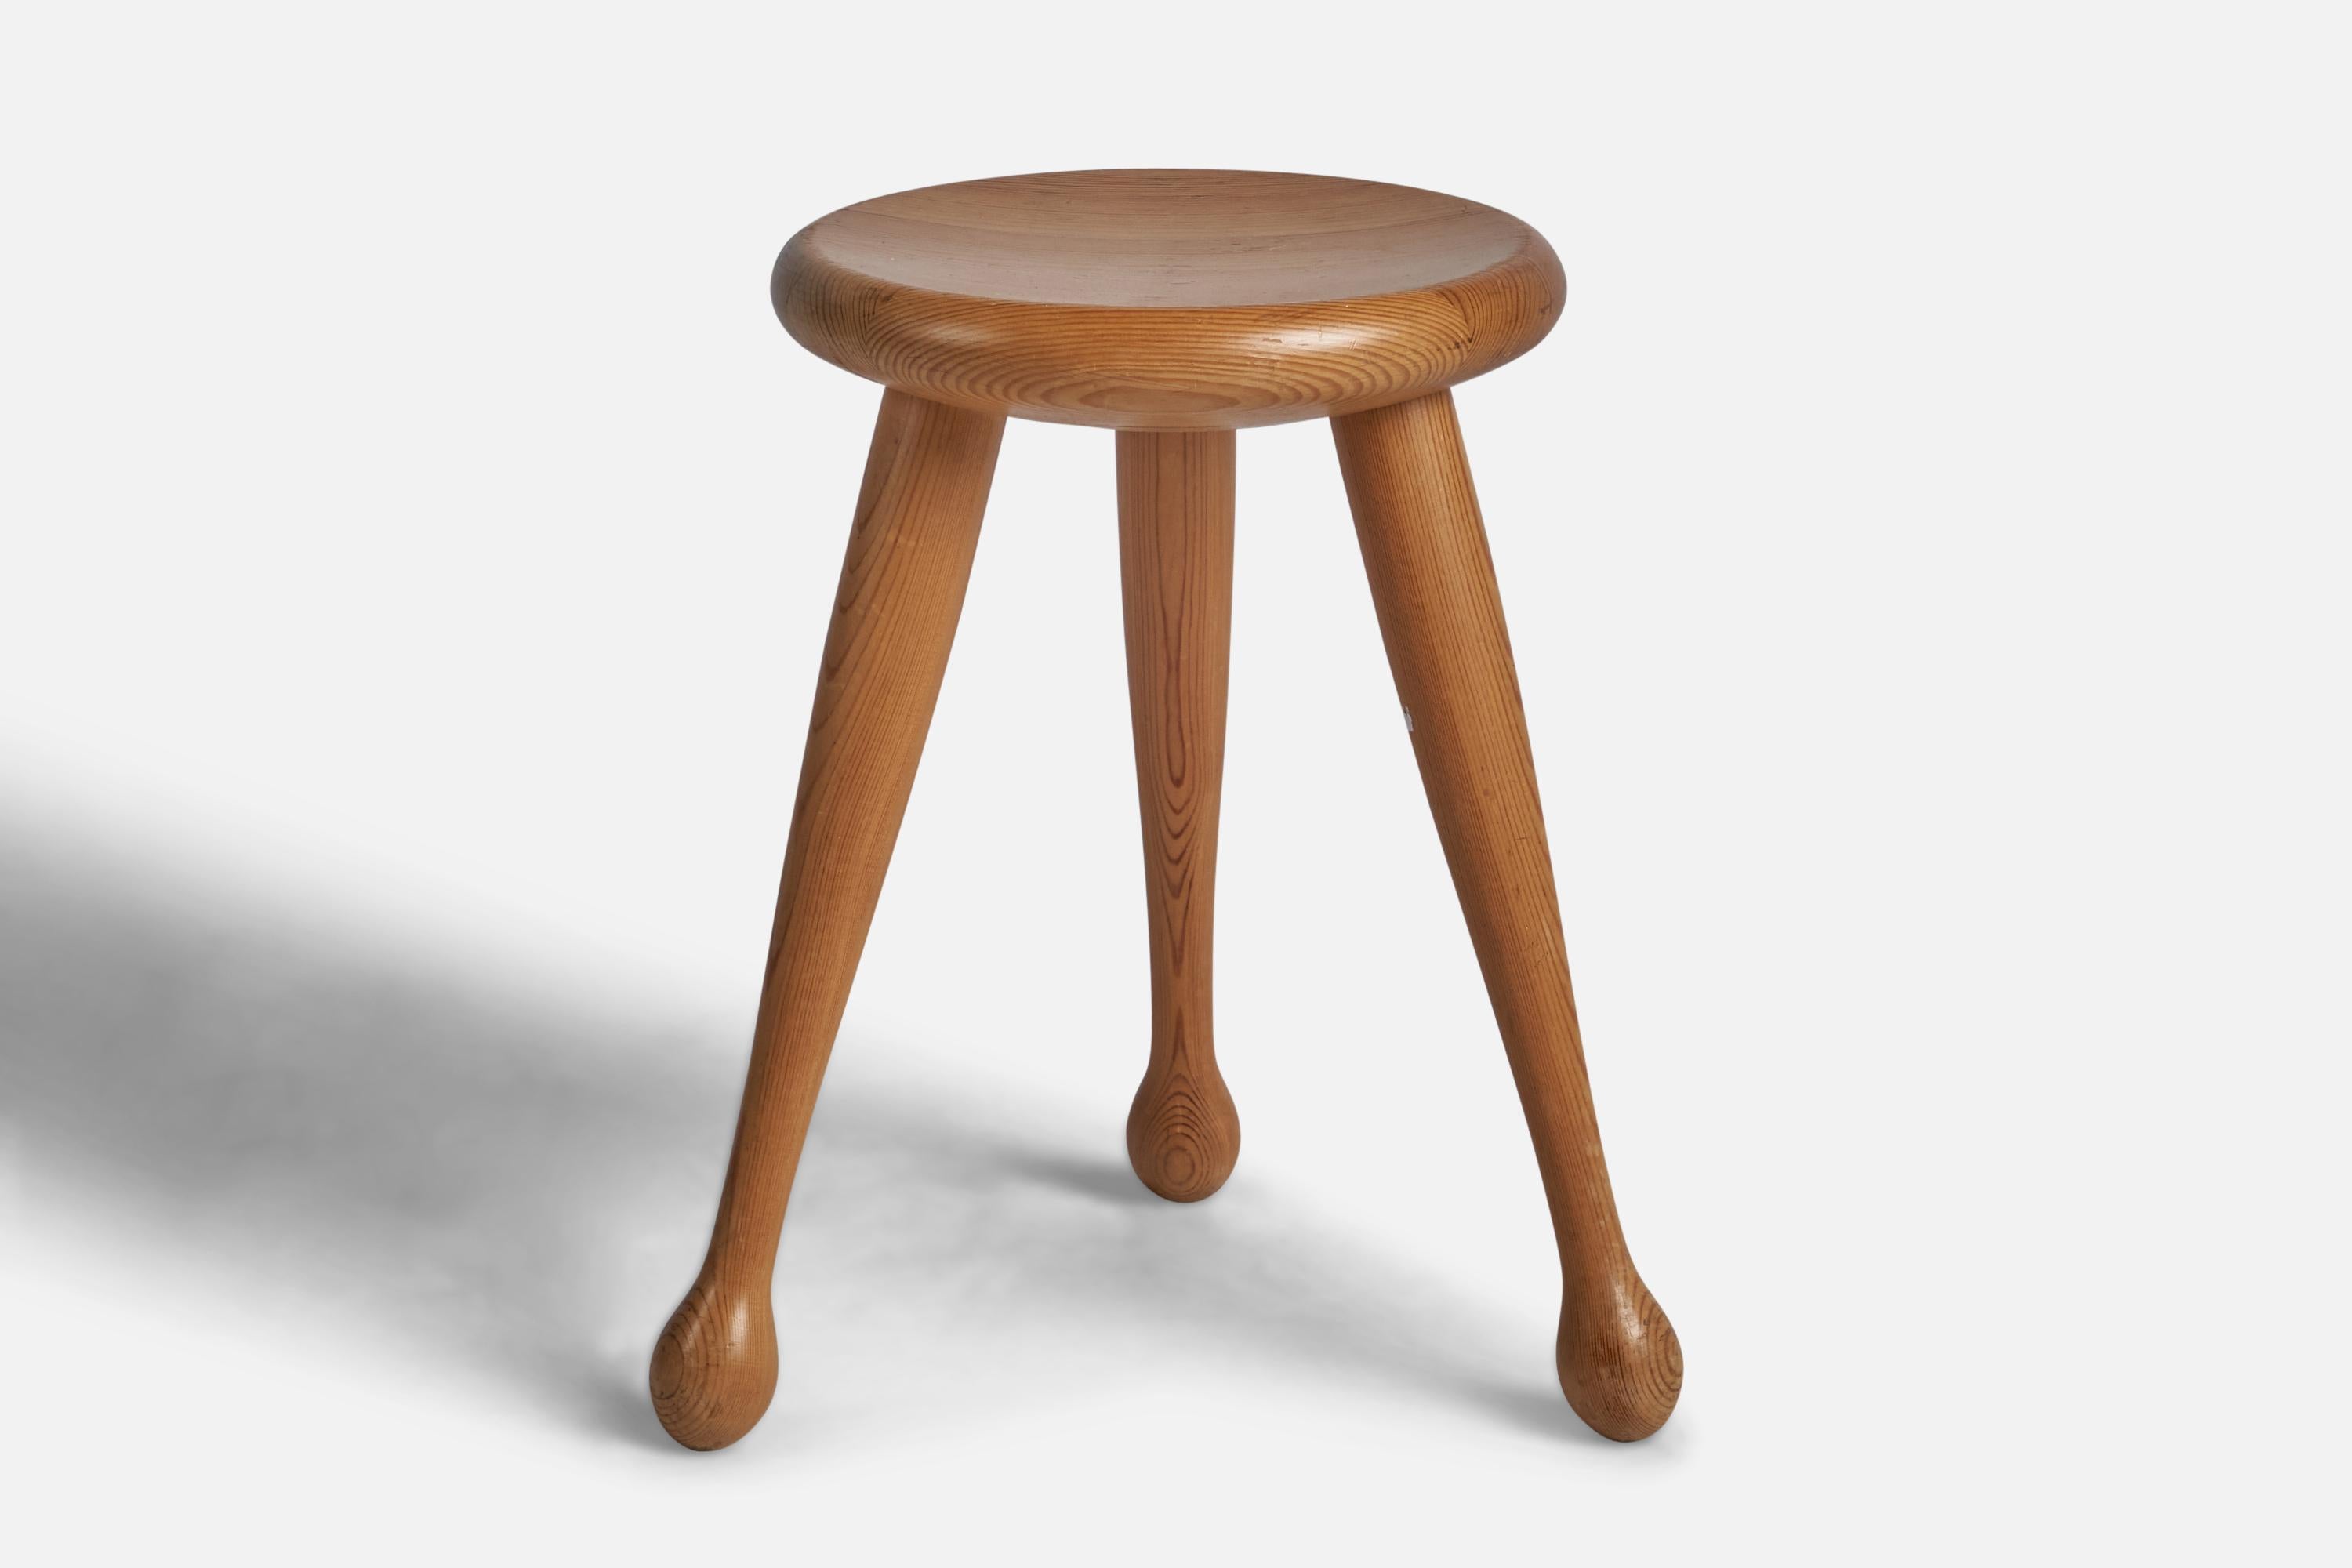 A pine stool designed and produced by Möbelkompaniet Ahl & Wallén, Sweden, 1950s.